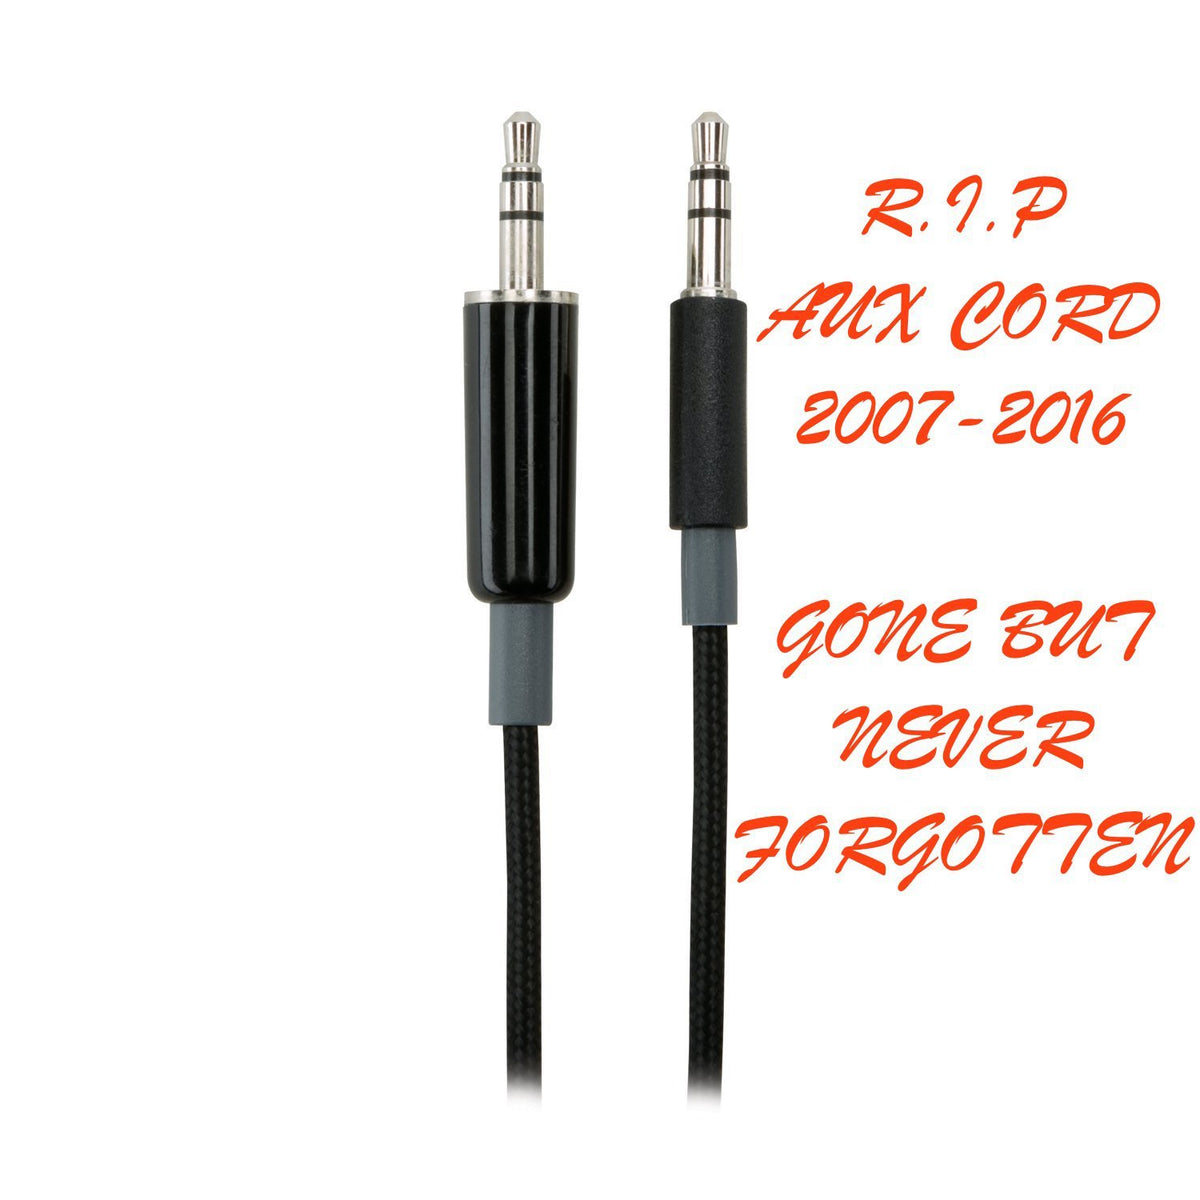 R.I.P.: The Aux Cord